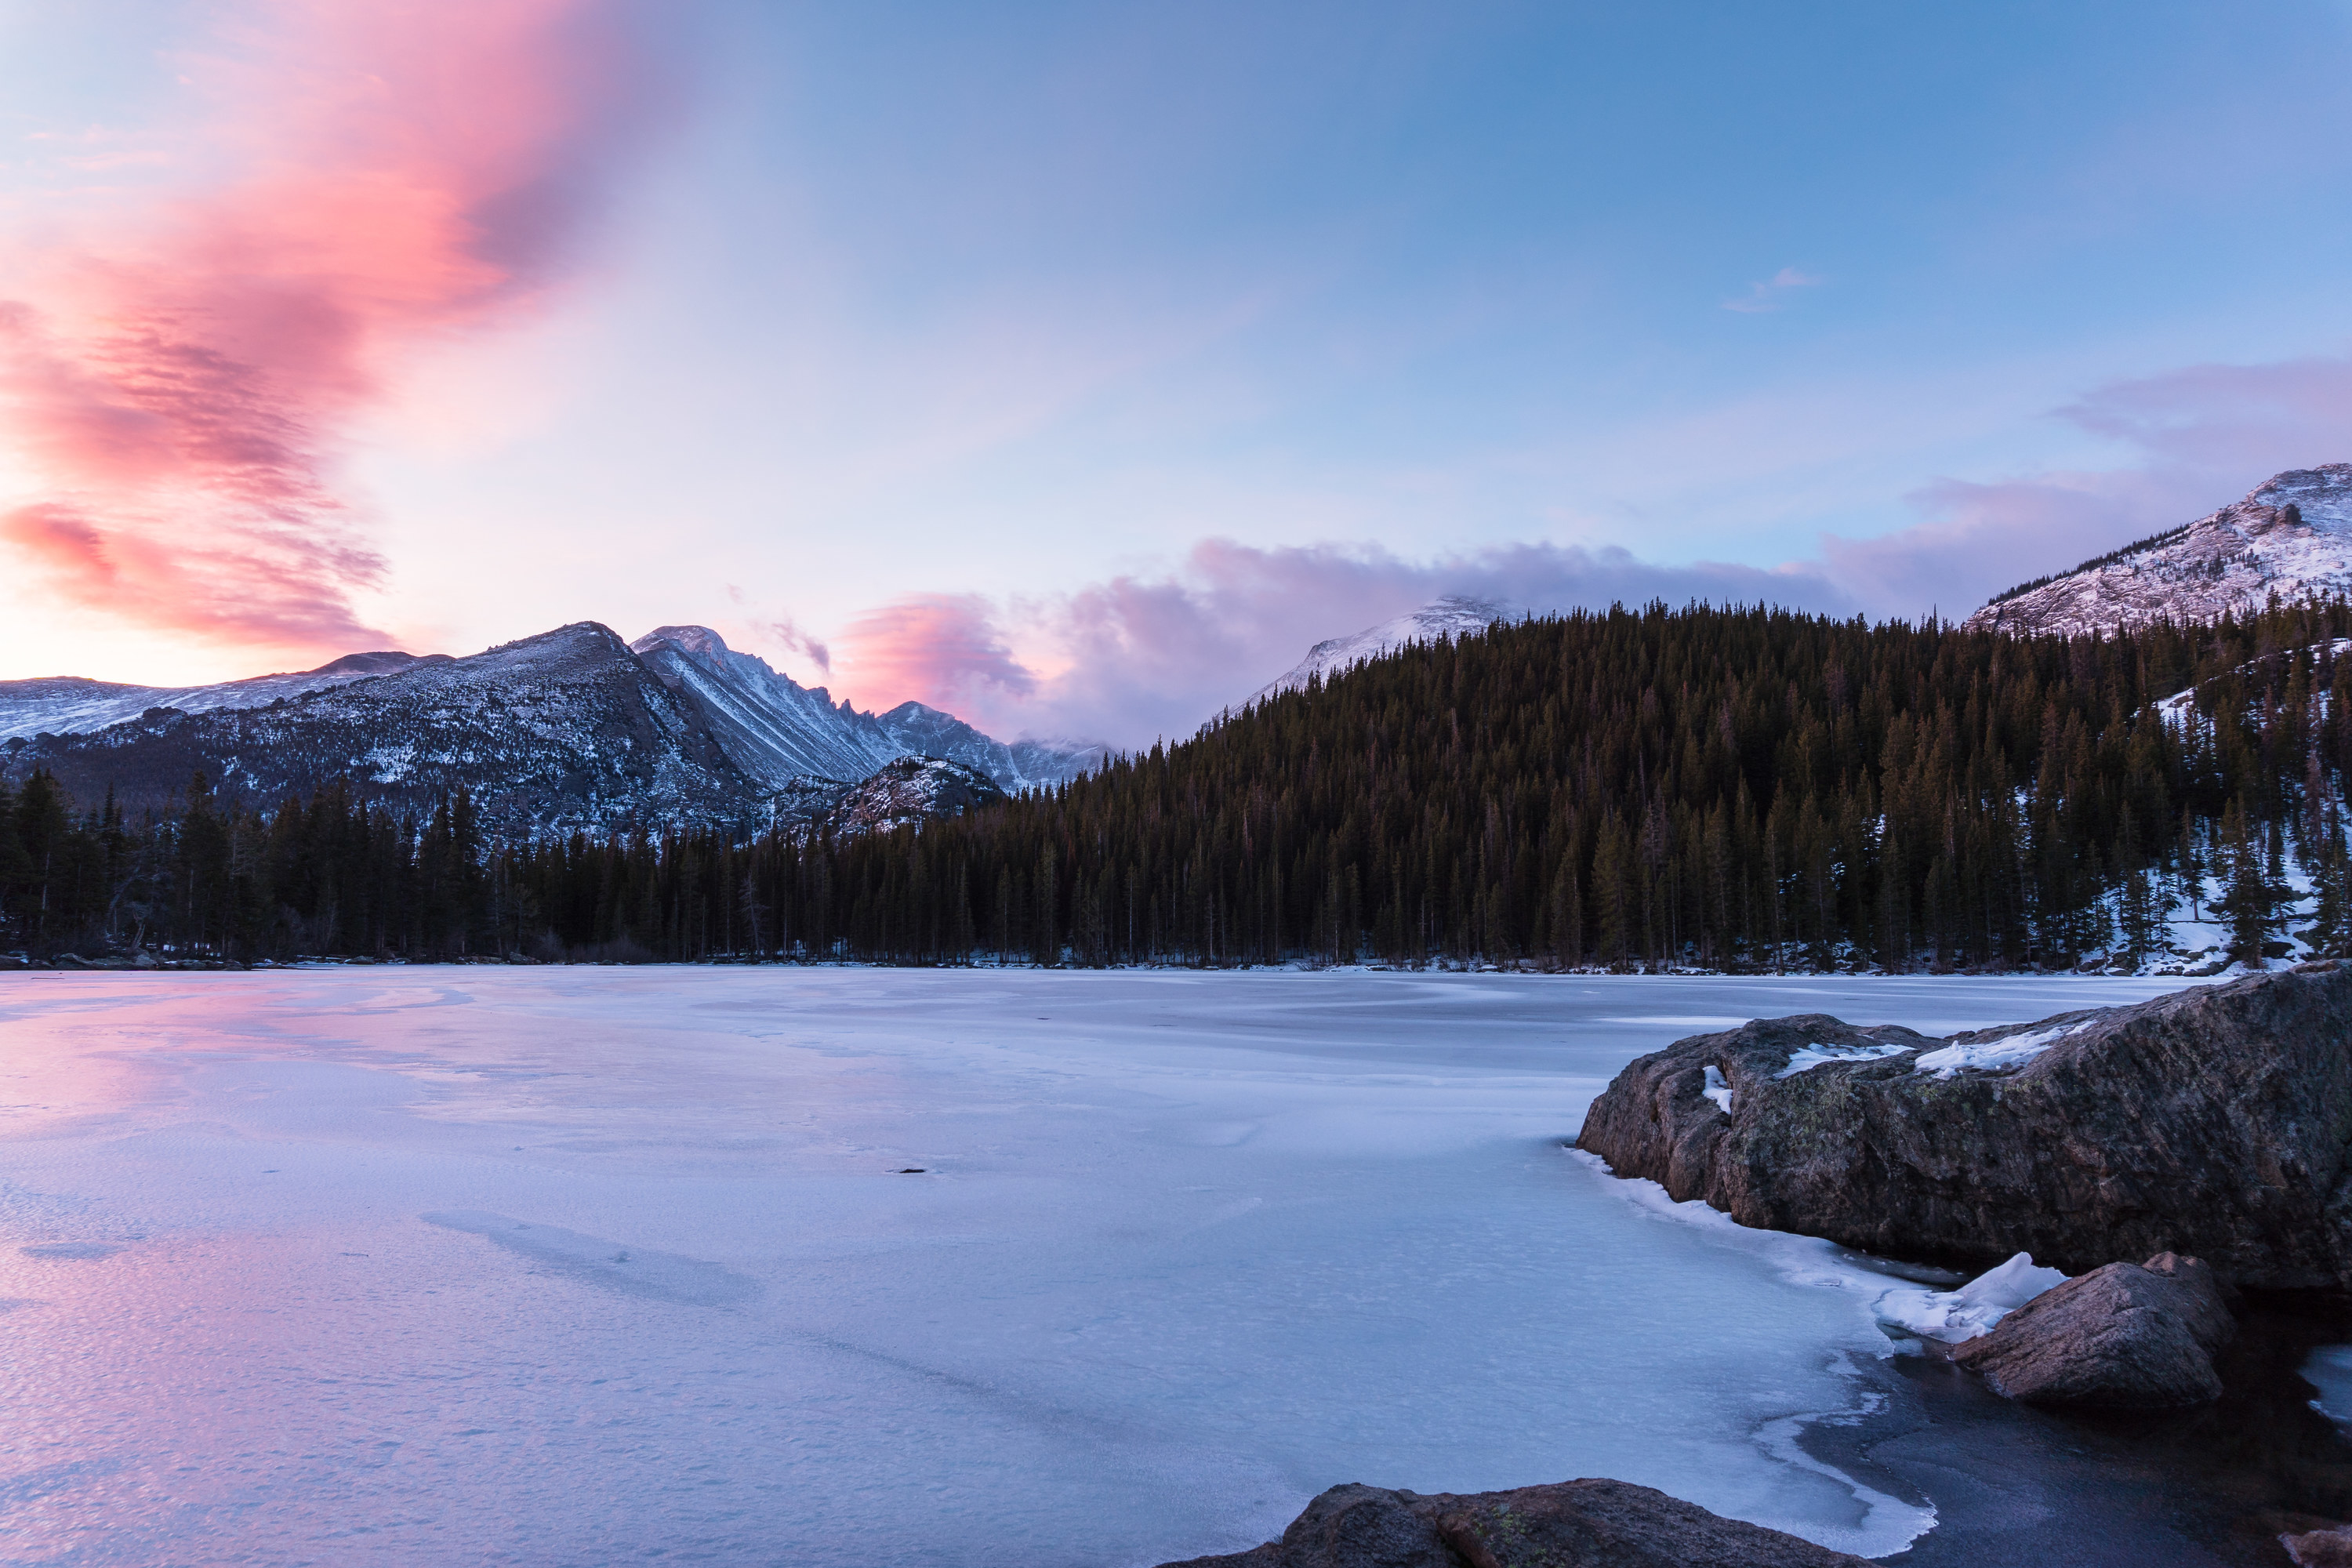 Winter sunrise at Bear Lake in Rocky Mountain National Park with the lake frozen